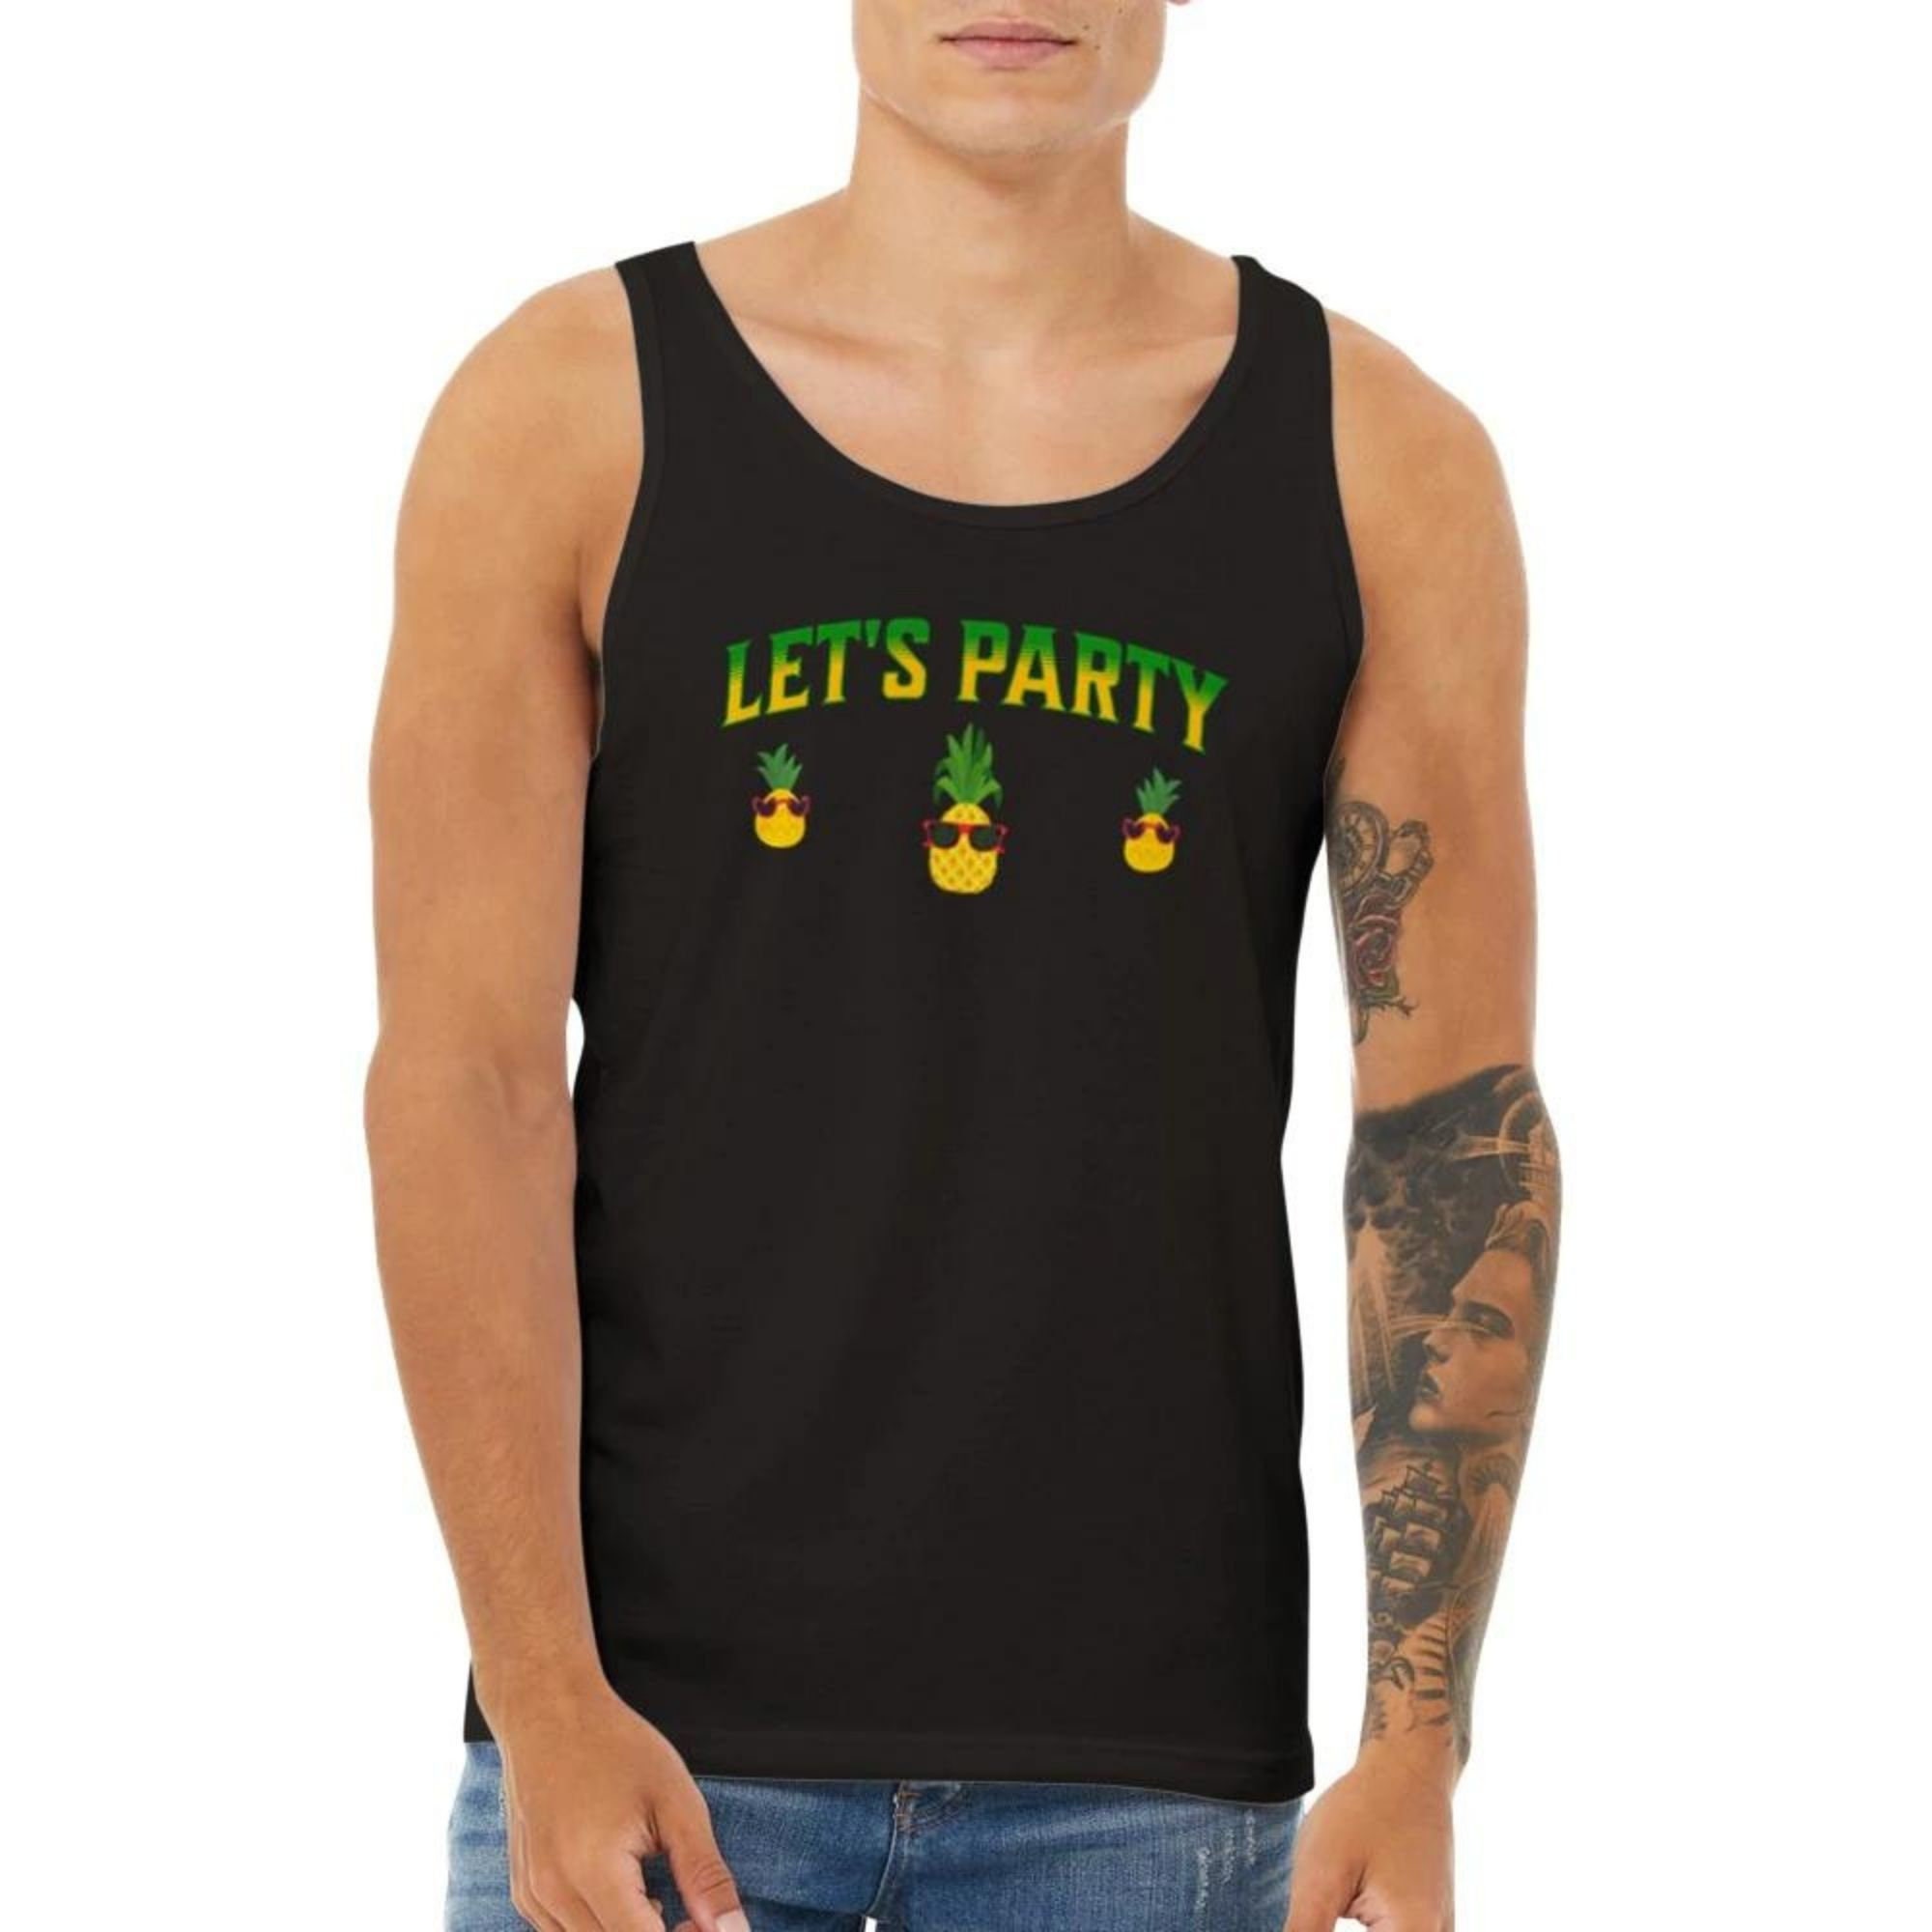 Lets Party Pineapple Unisex Tank Top Swingers Sex Party